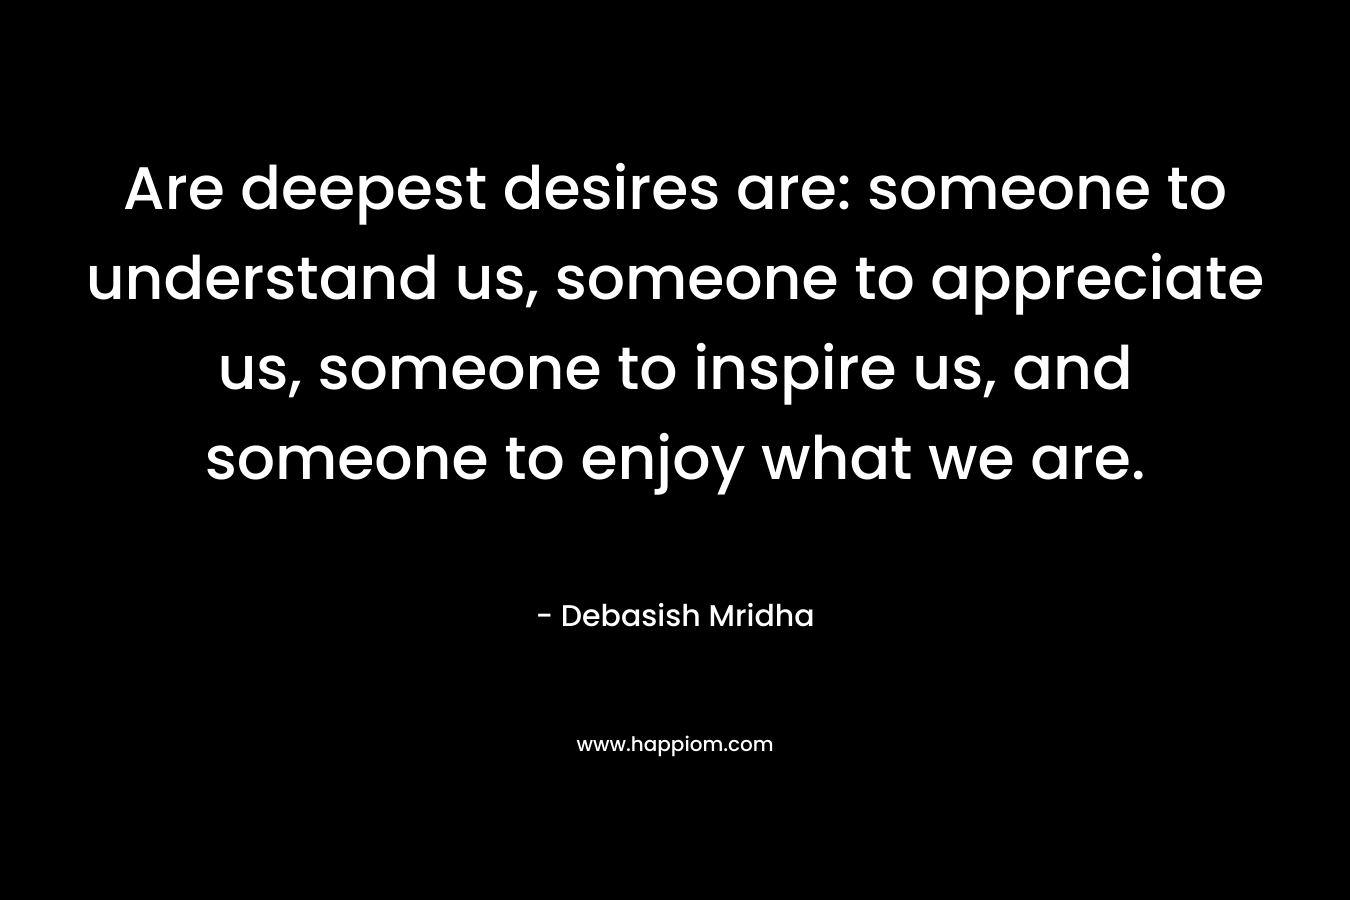 Are deepest desires are: someone to understand us, someone to appreciate us, someone to inspire us, and someone to enjoy what we are.